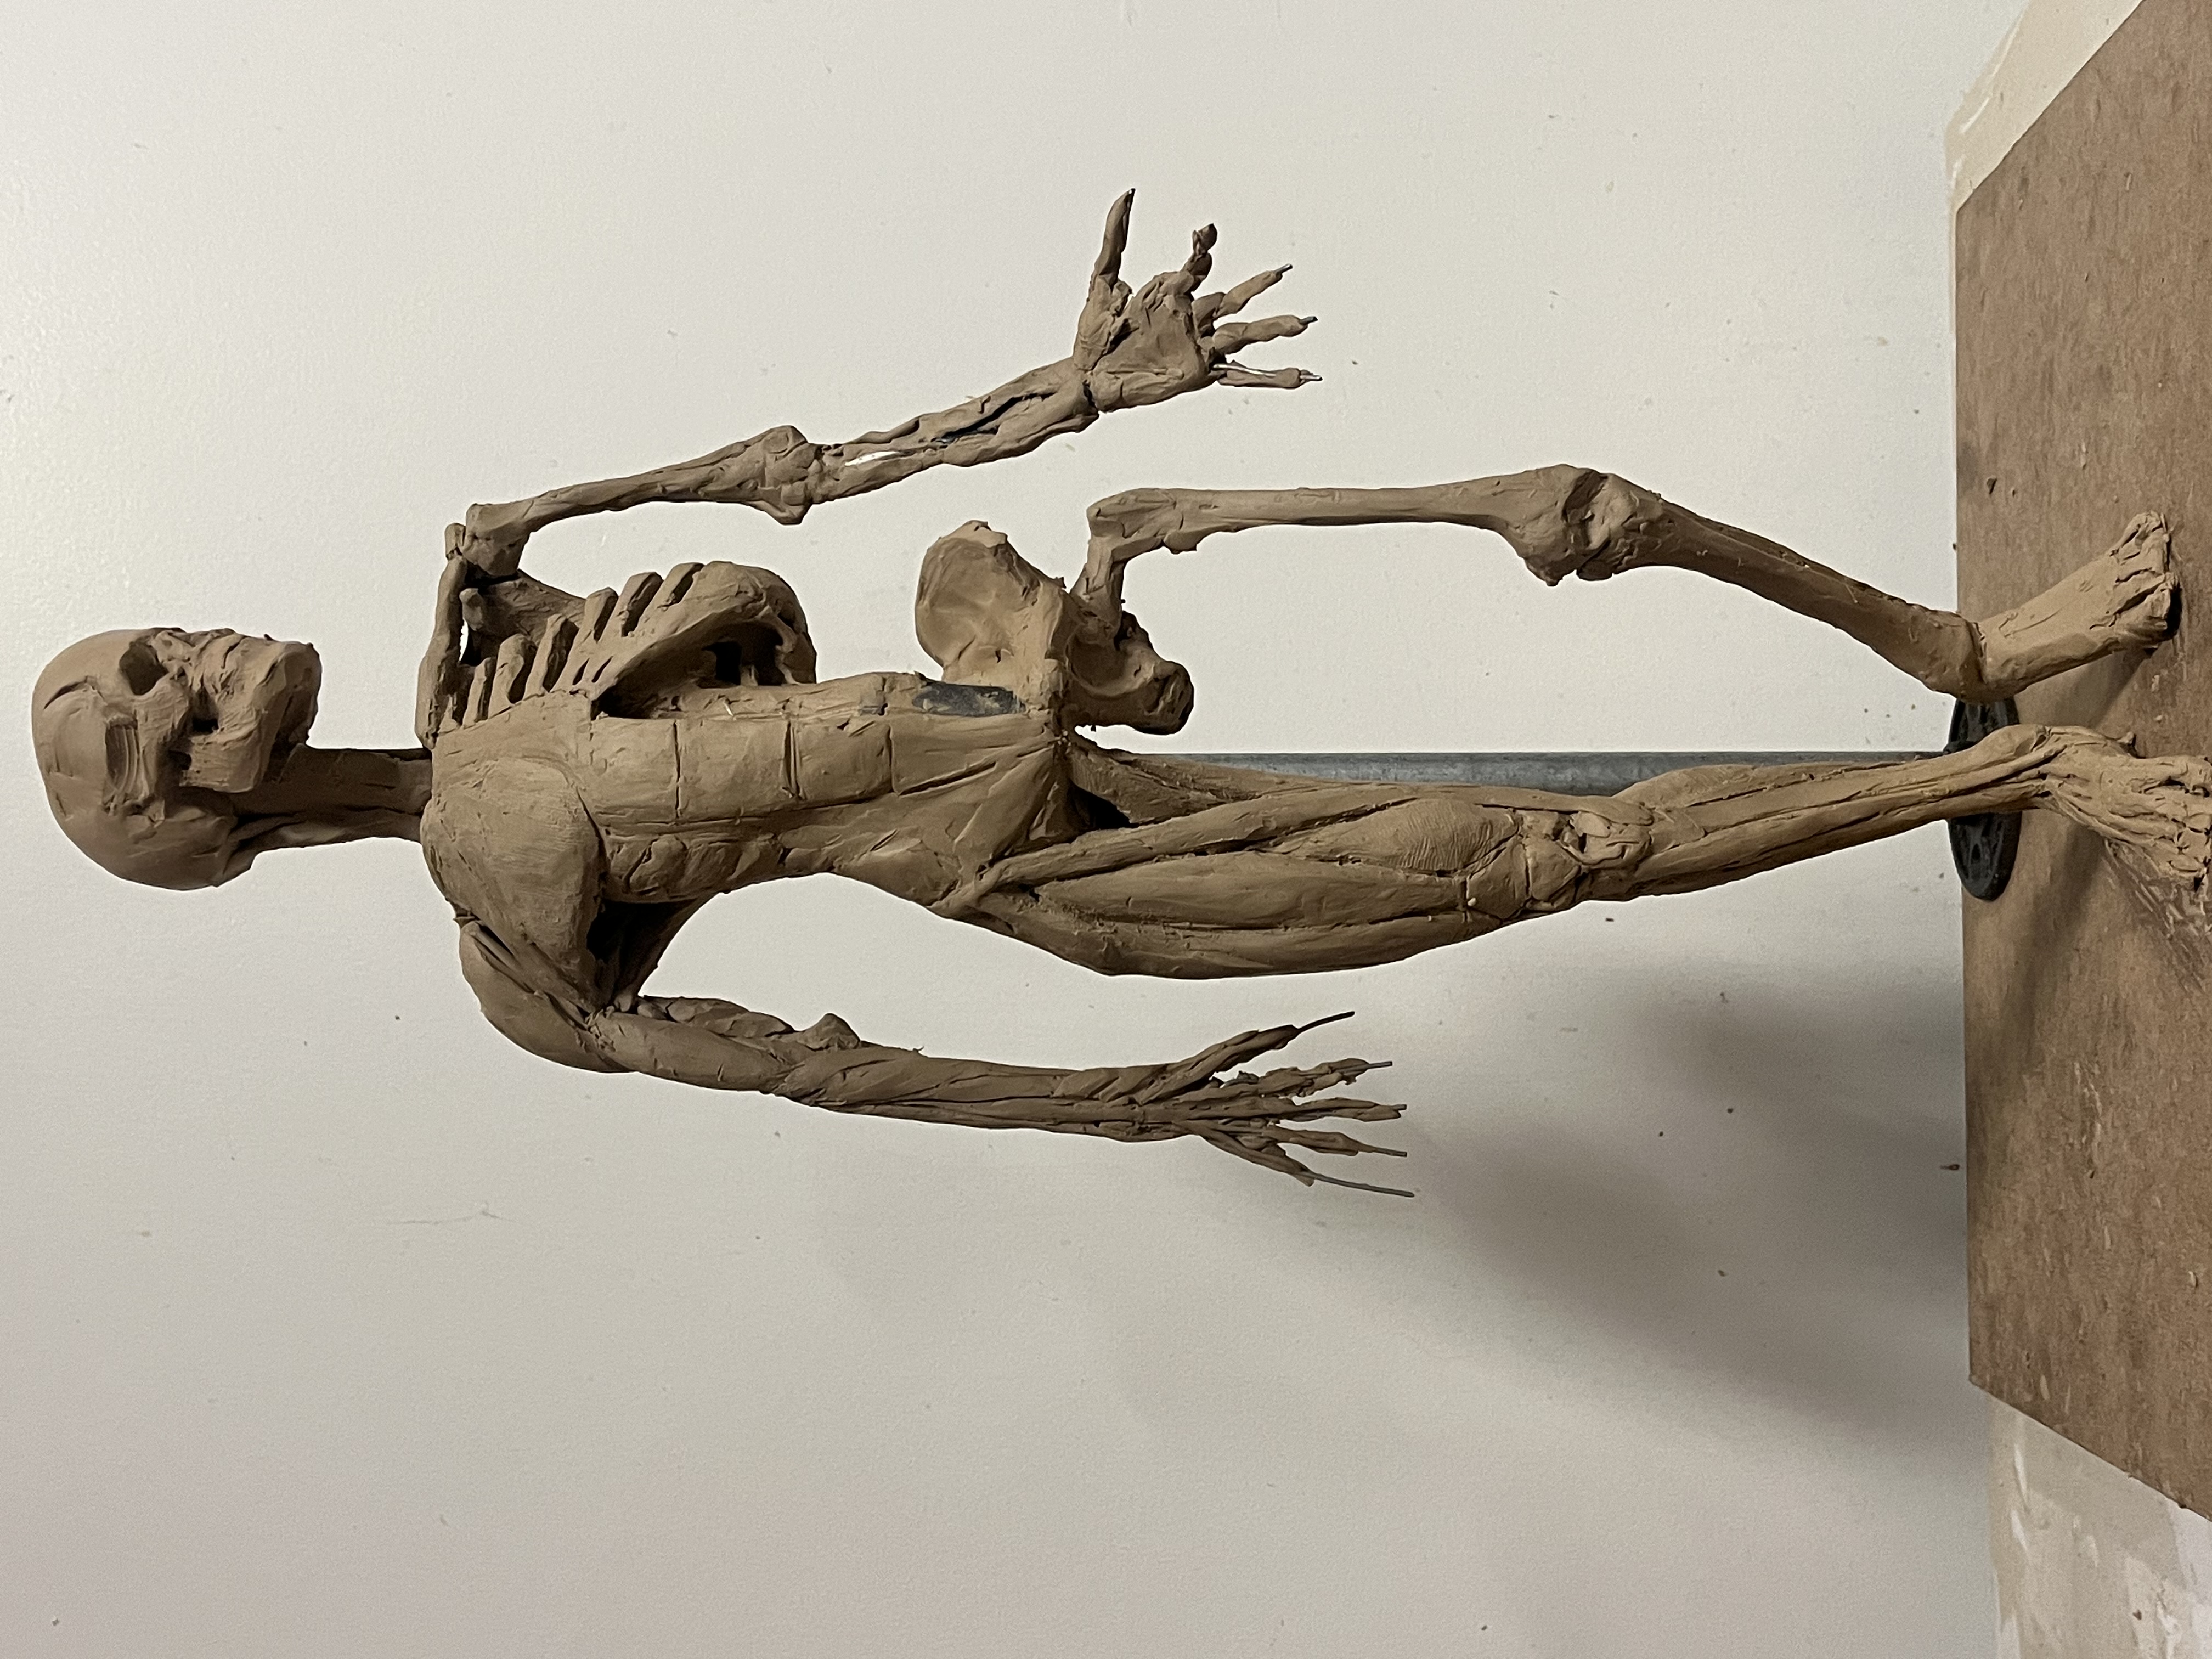 New! Écorché Sculpture: artistic anatomy from the skeletal system up